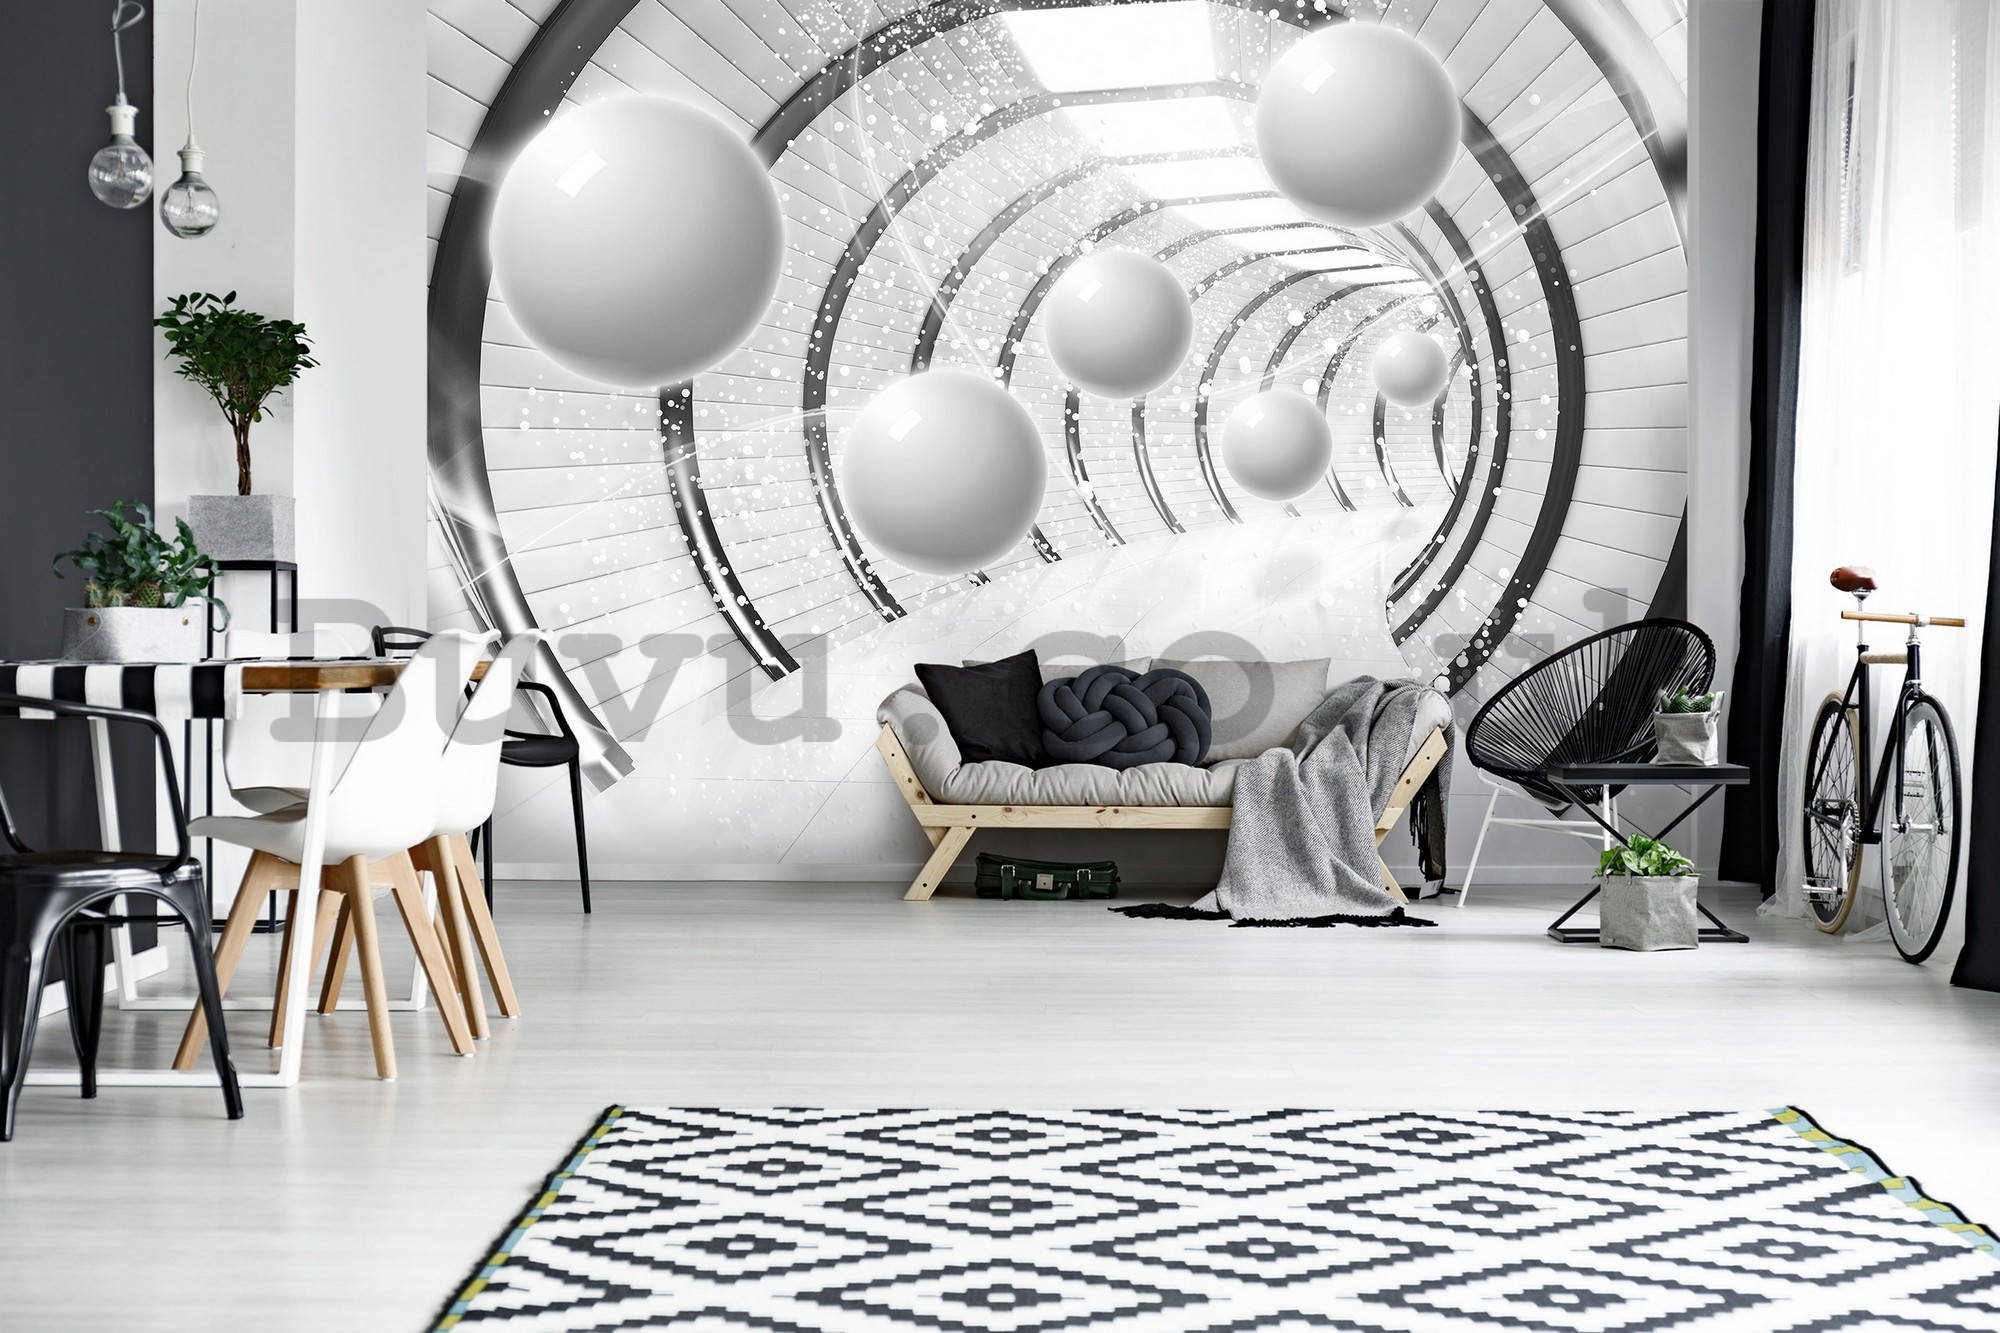 Wall mural vlies: Spheres in the tunnel - 416x254 cm